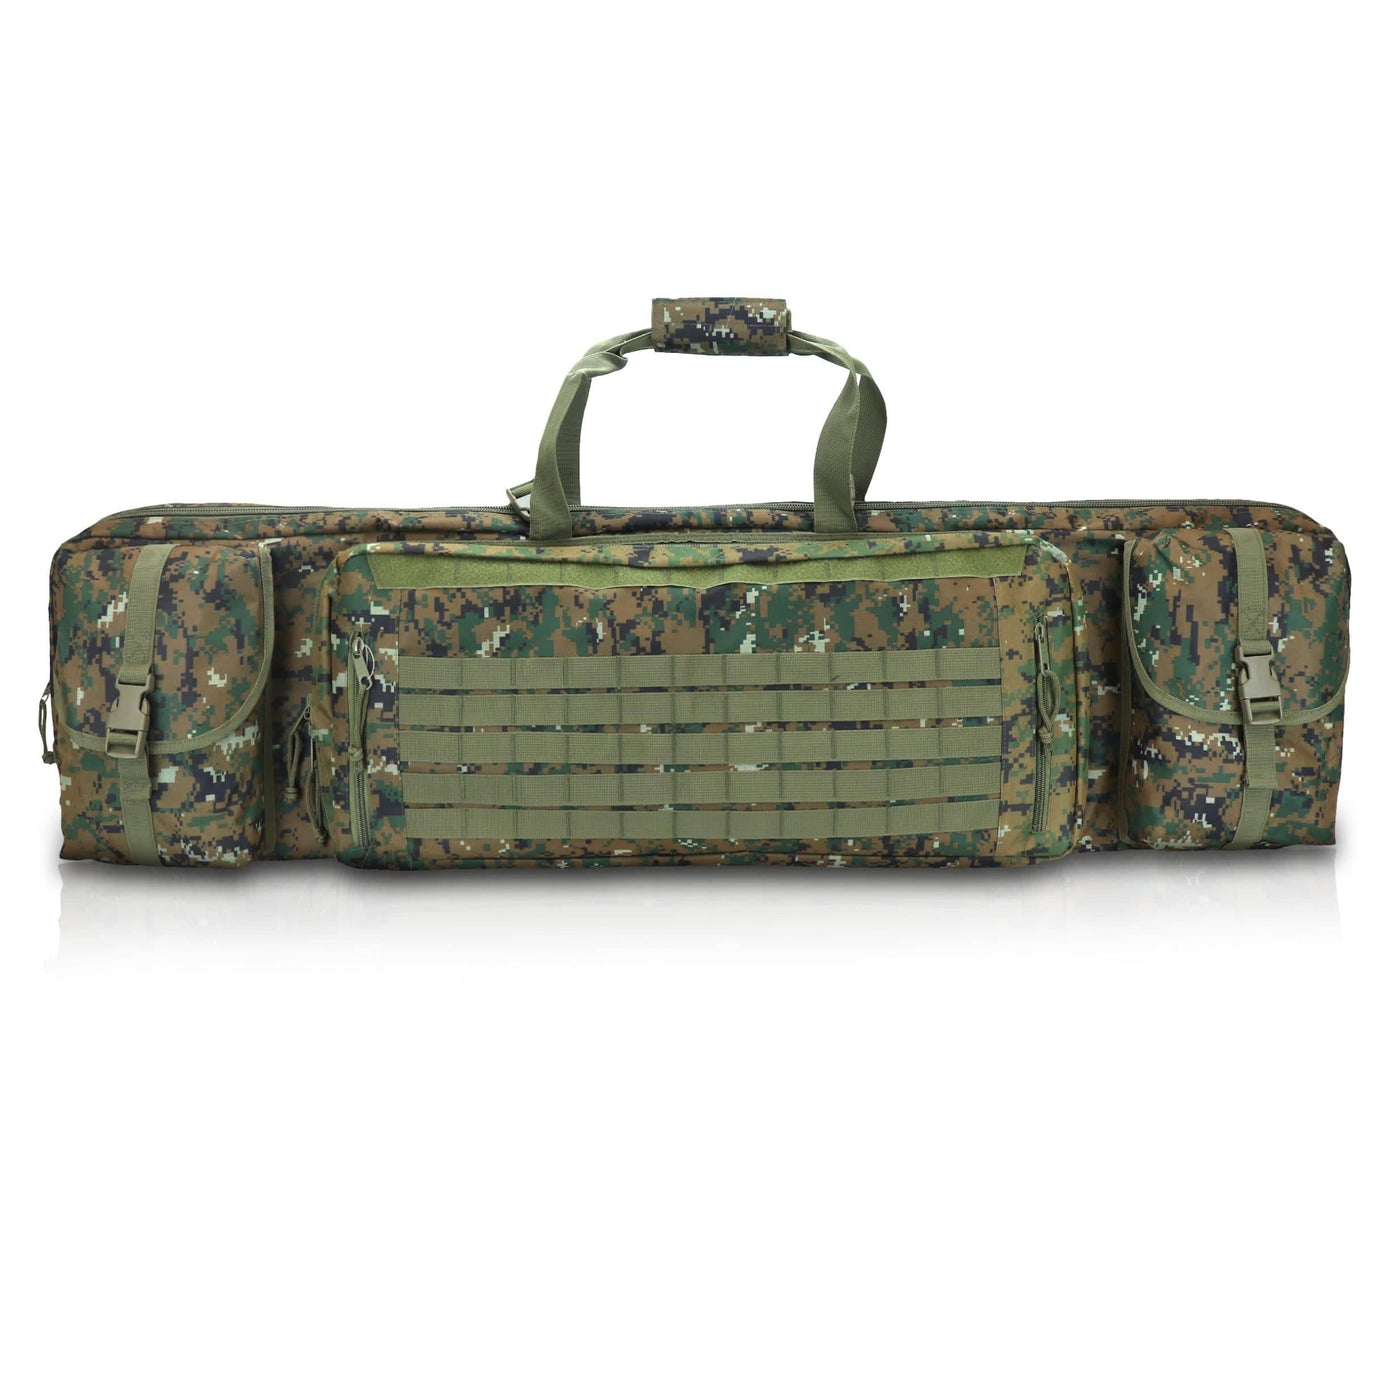 Osage River Osage River 51 in Double Rifle Case Green Digital Camo Shooting